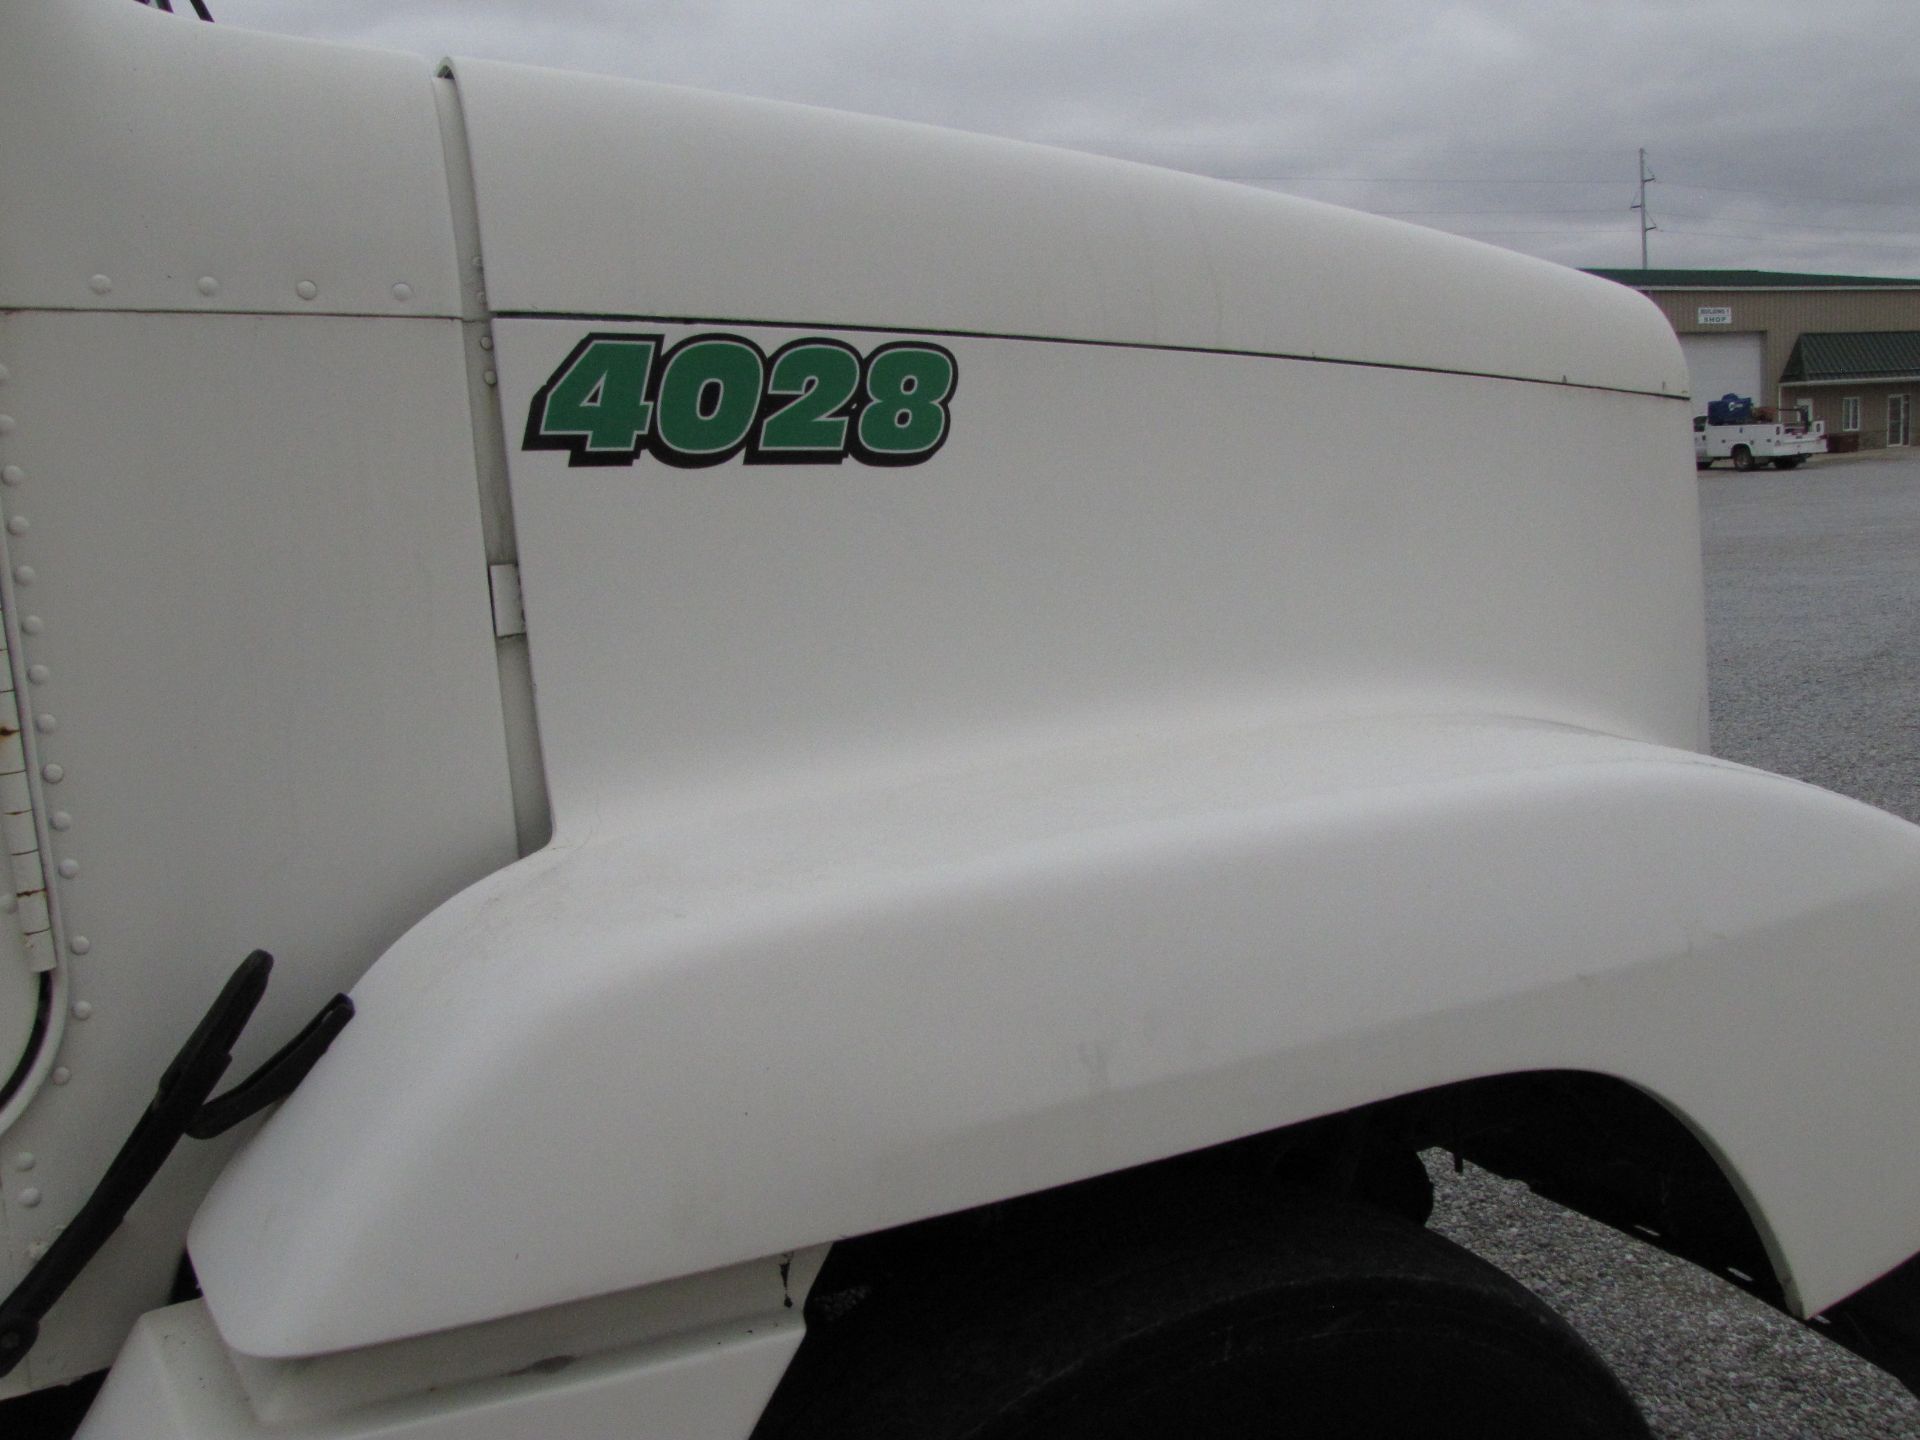 1993 Freightliner FLD120 semi truck - Image 48 of 71